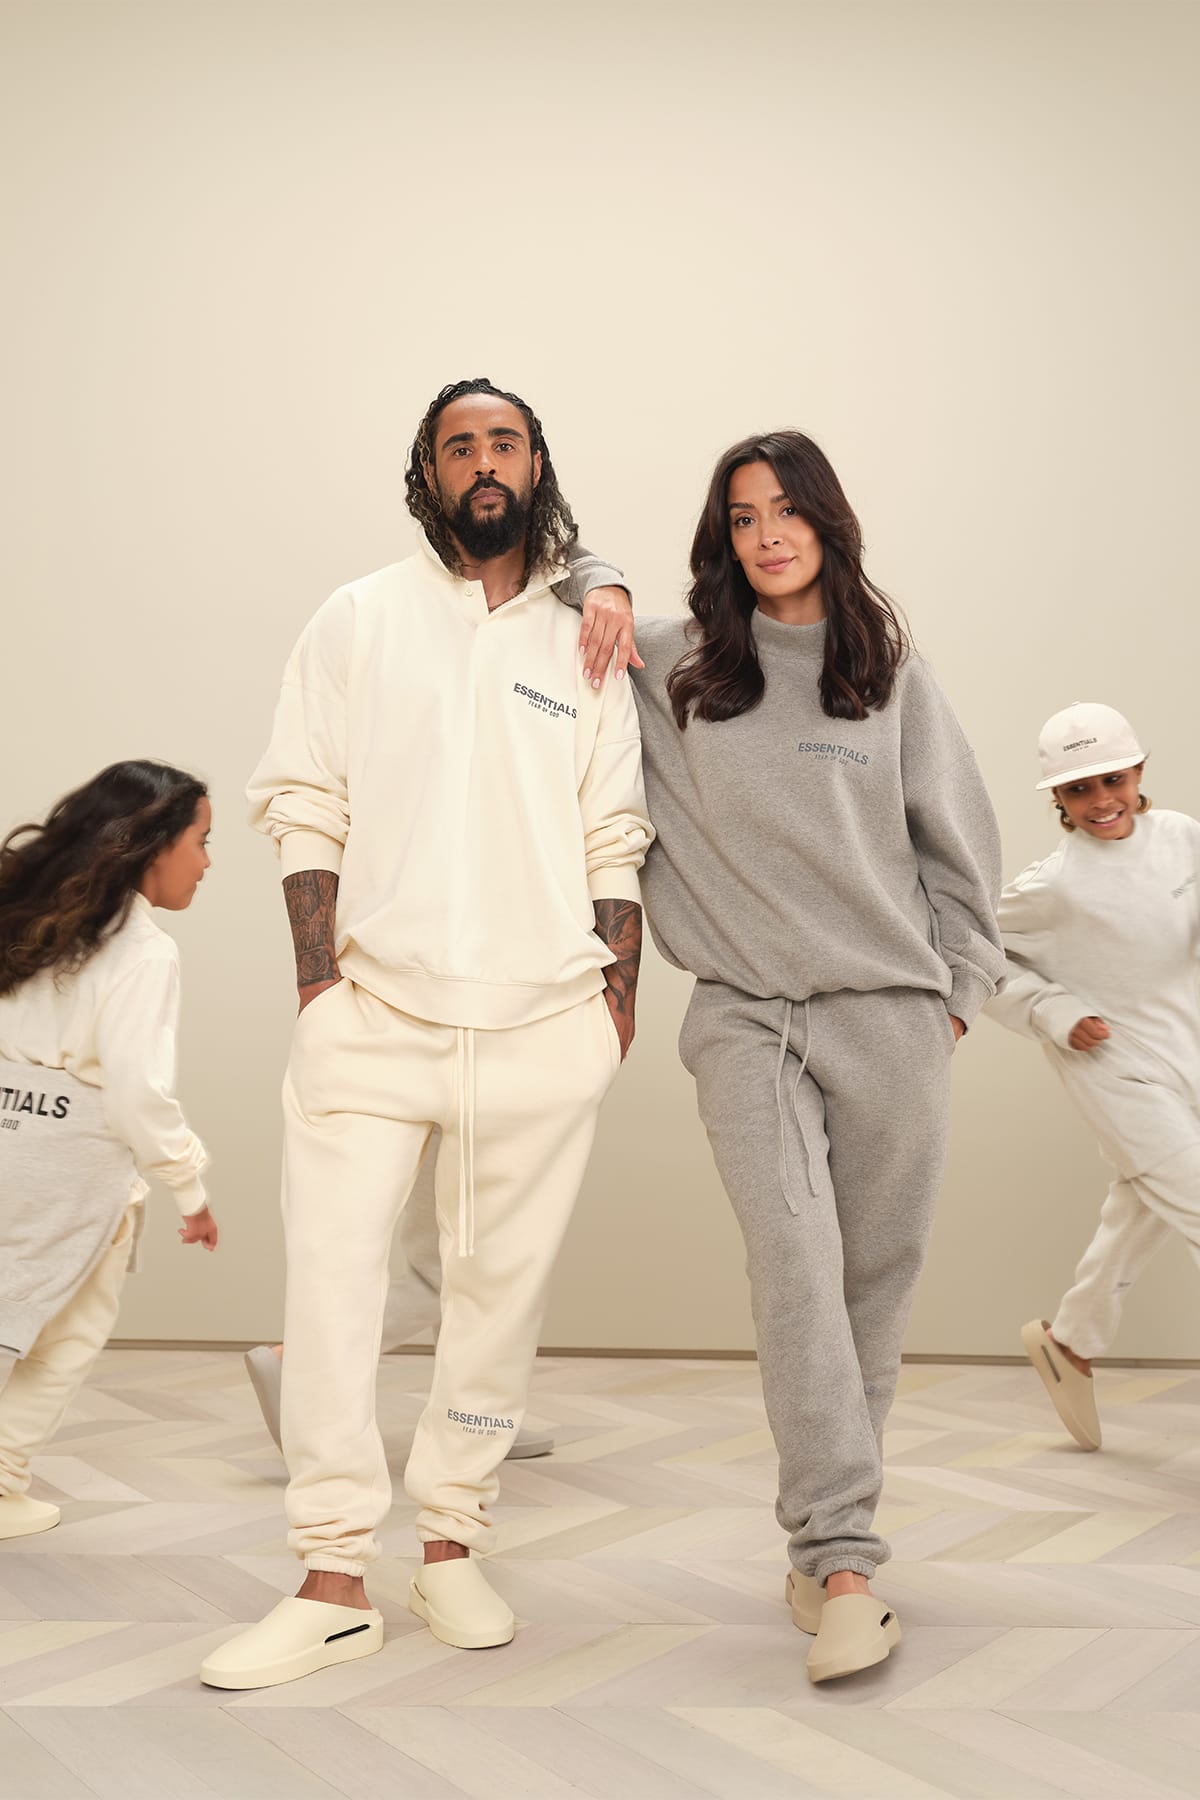 Fear of God Launches 